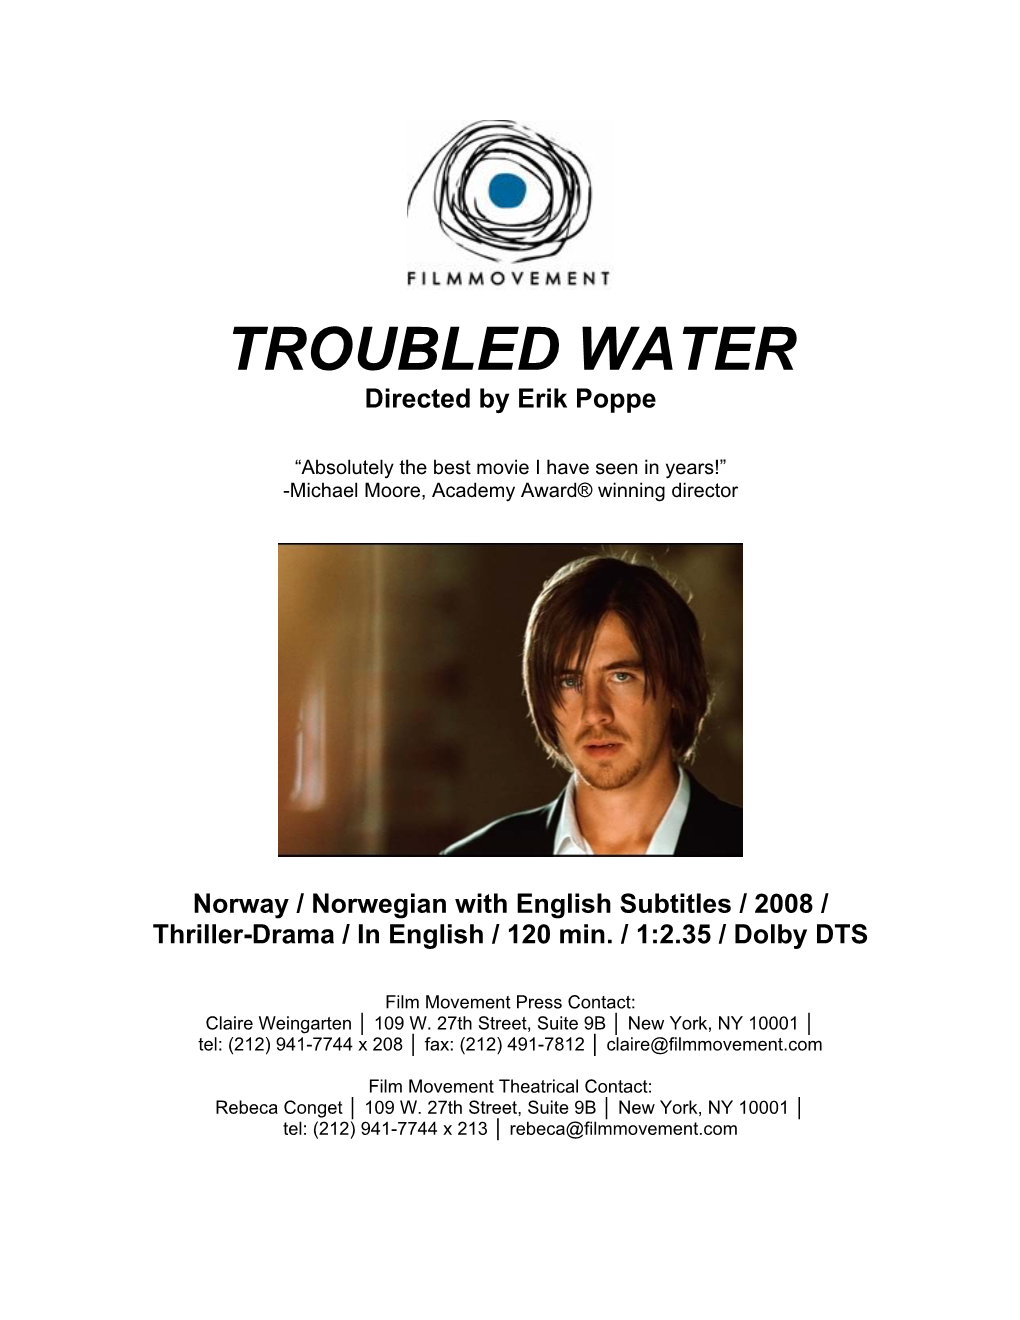 TROUBLED WATER Directed by Erik Poppe